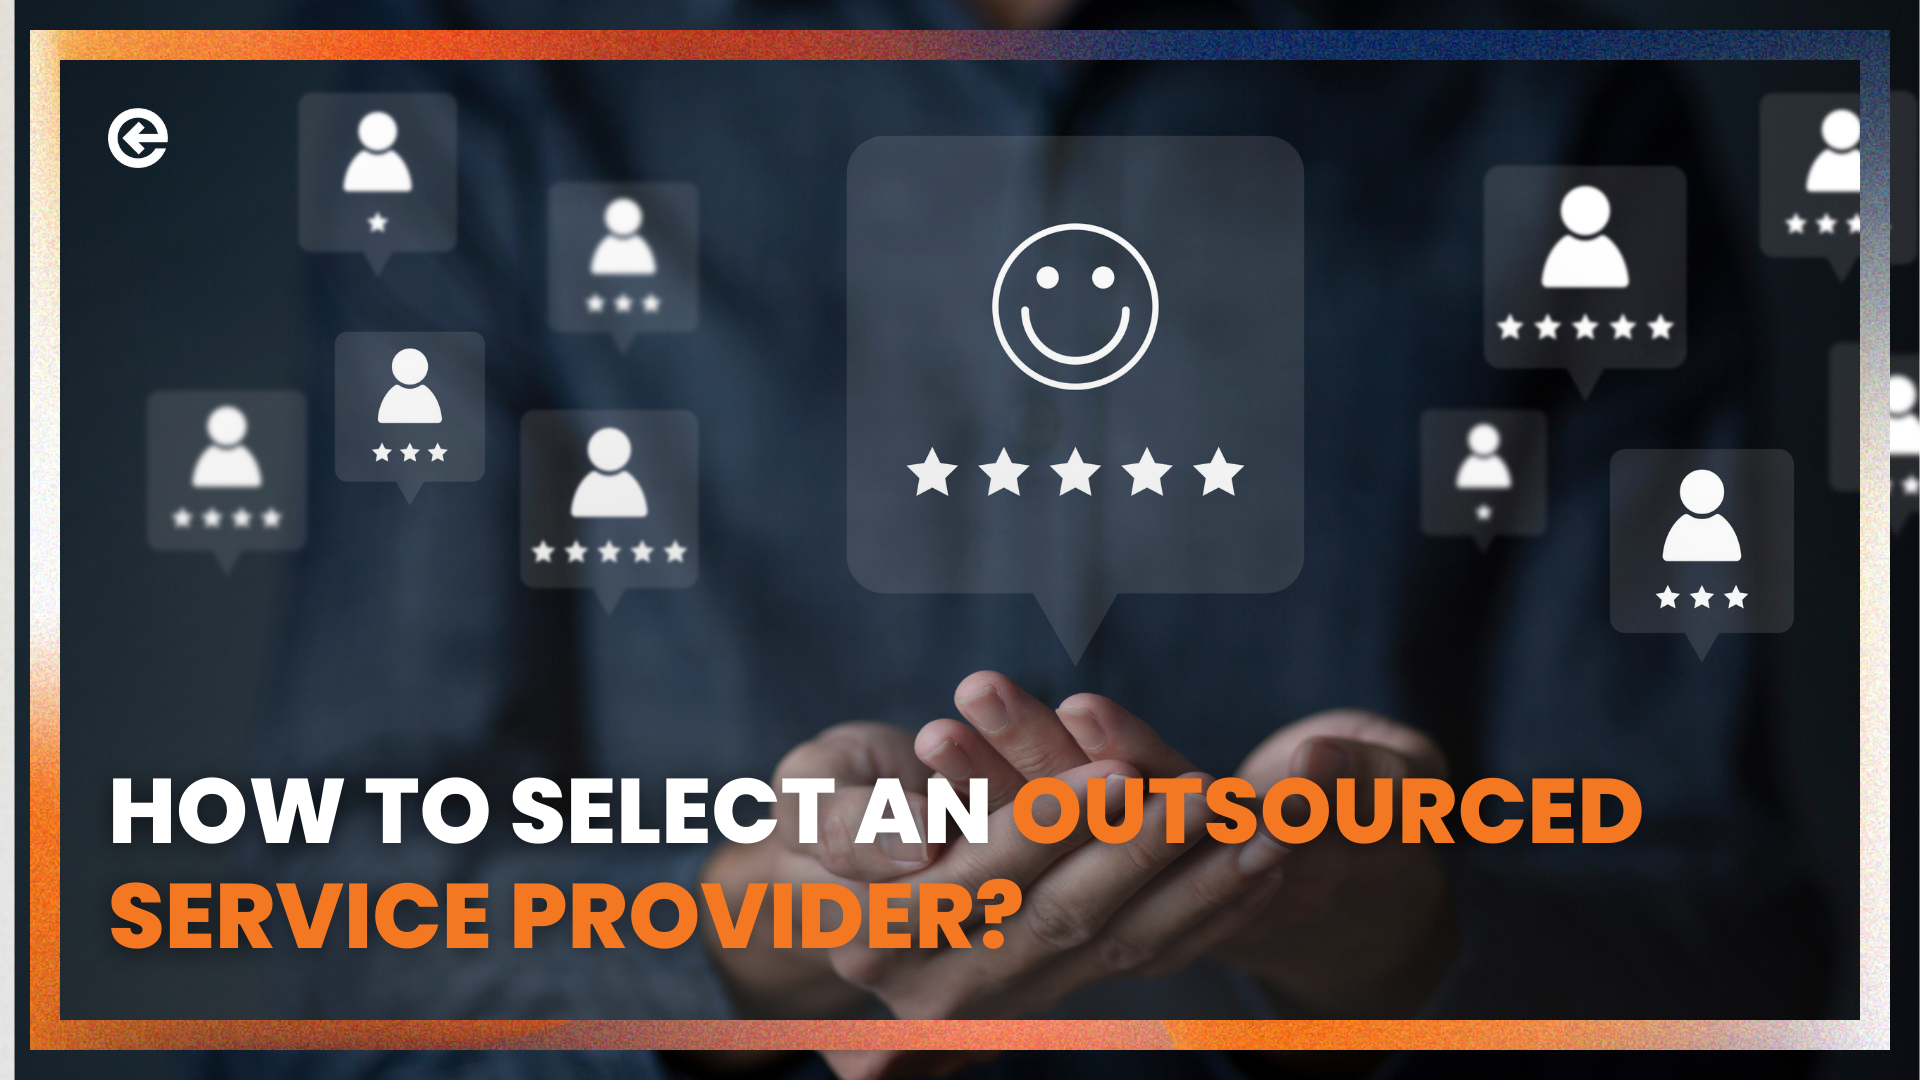 How to Select an Outsourced Service Provider